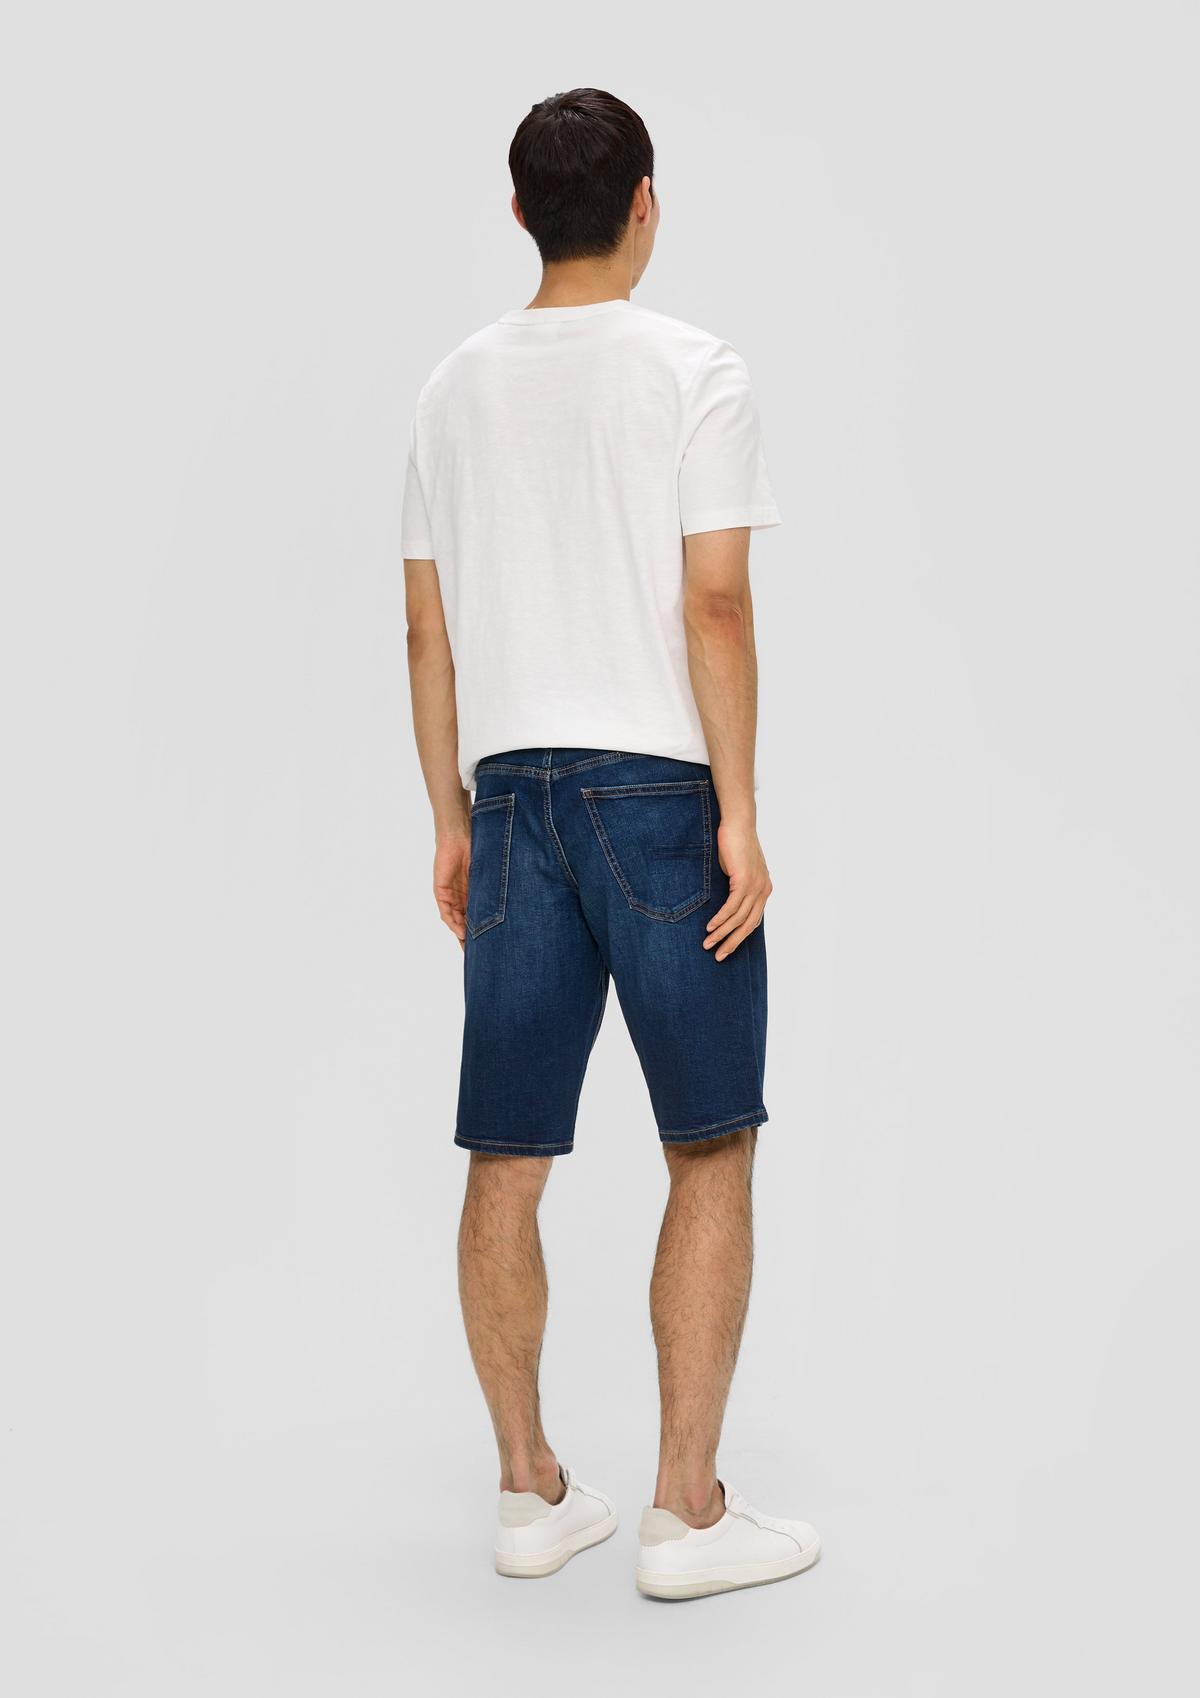 s.Oliver Jeans-Shorts / Regular Fit / Mid Rise